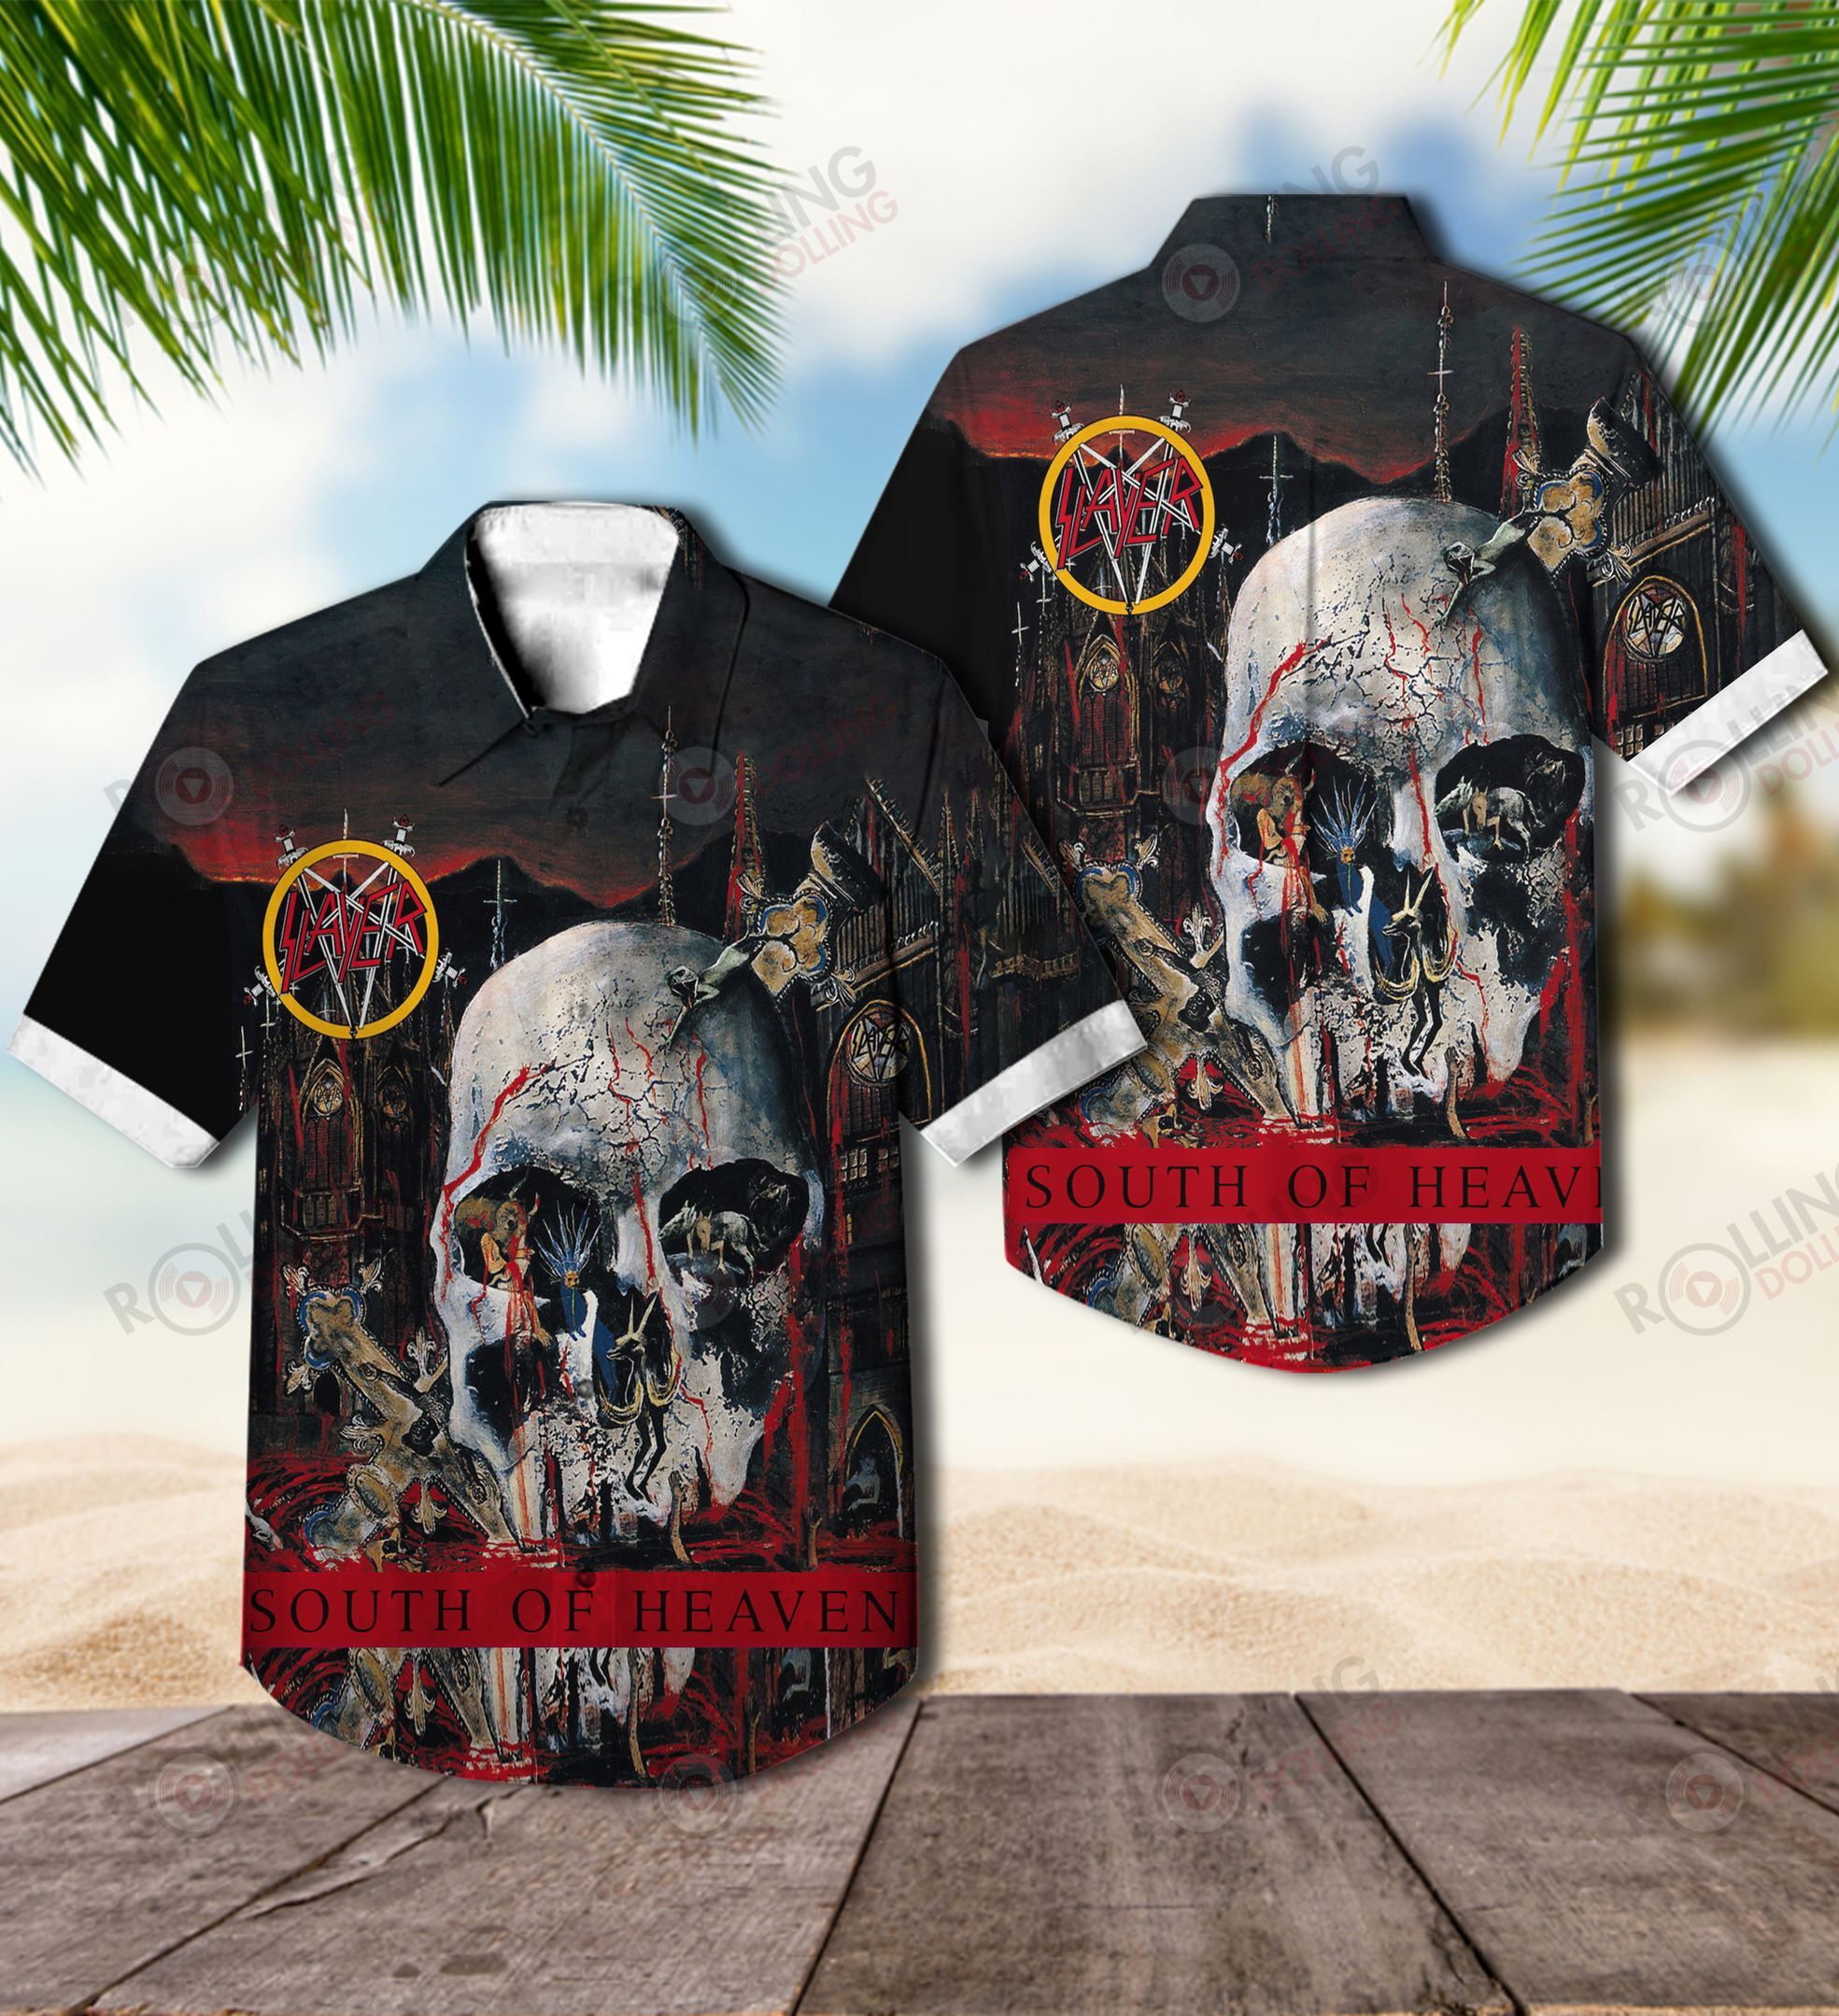 Now you can show off your love of all things band with this Hawaiian Shirt 55